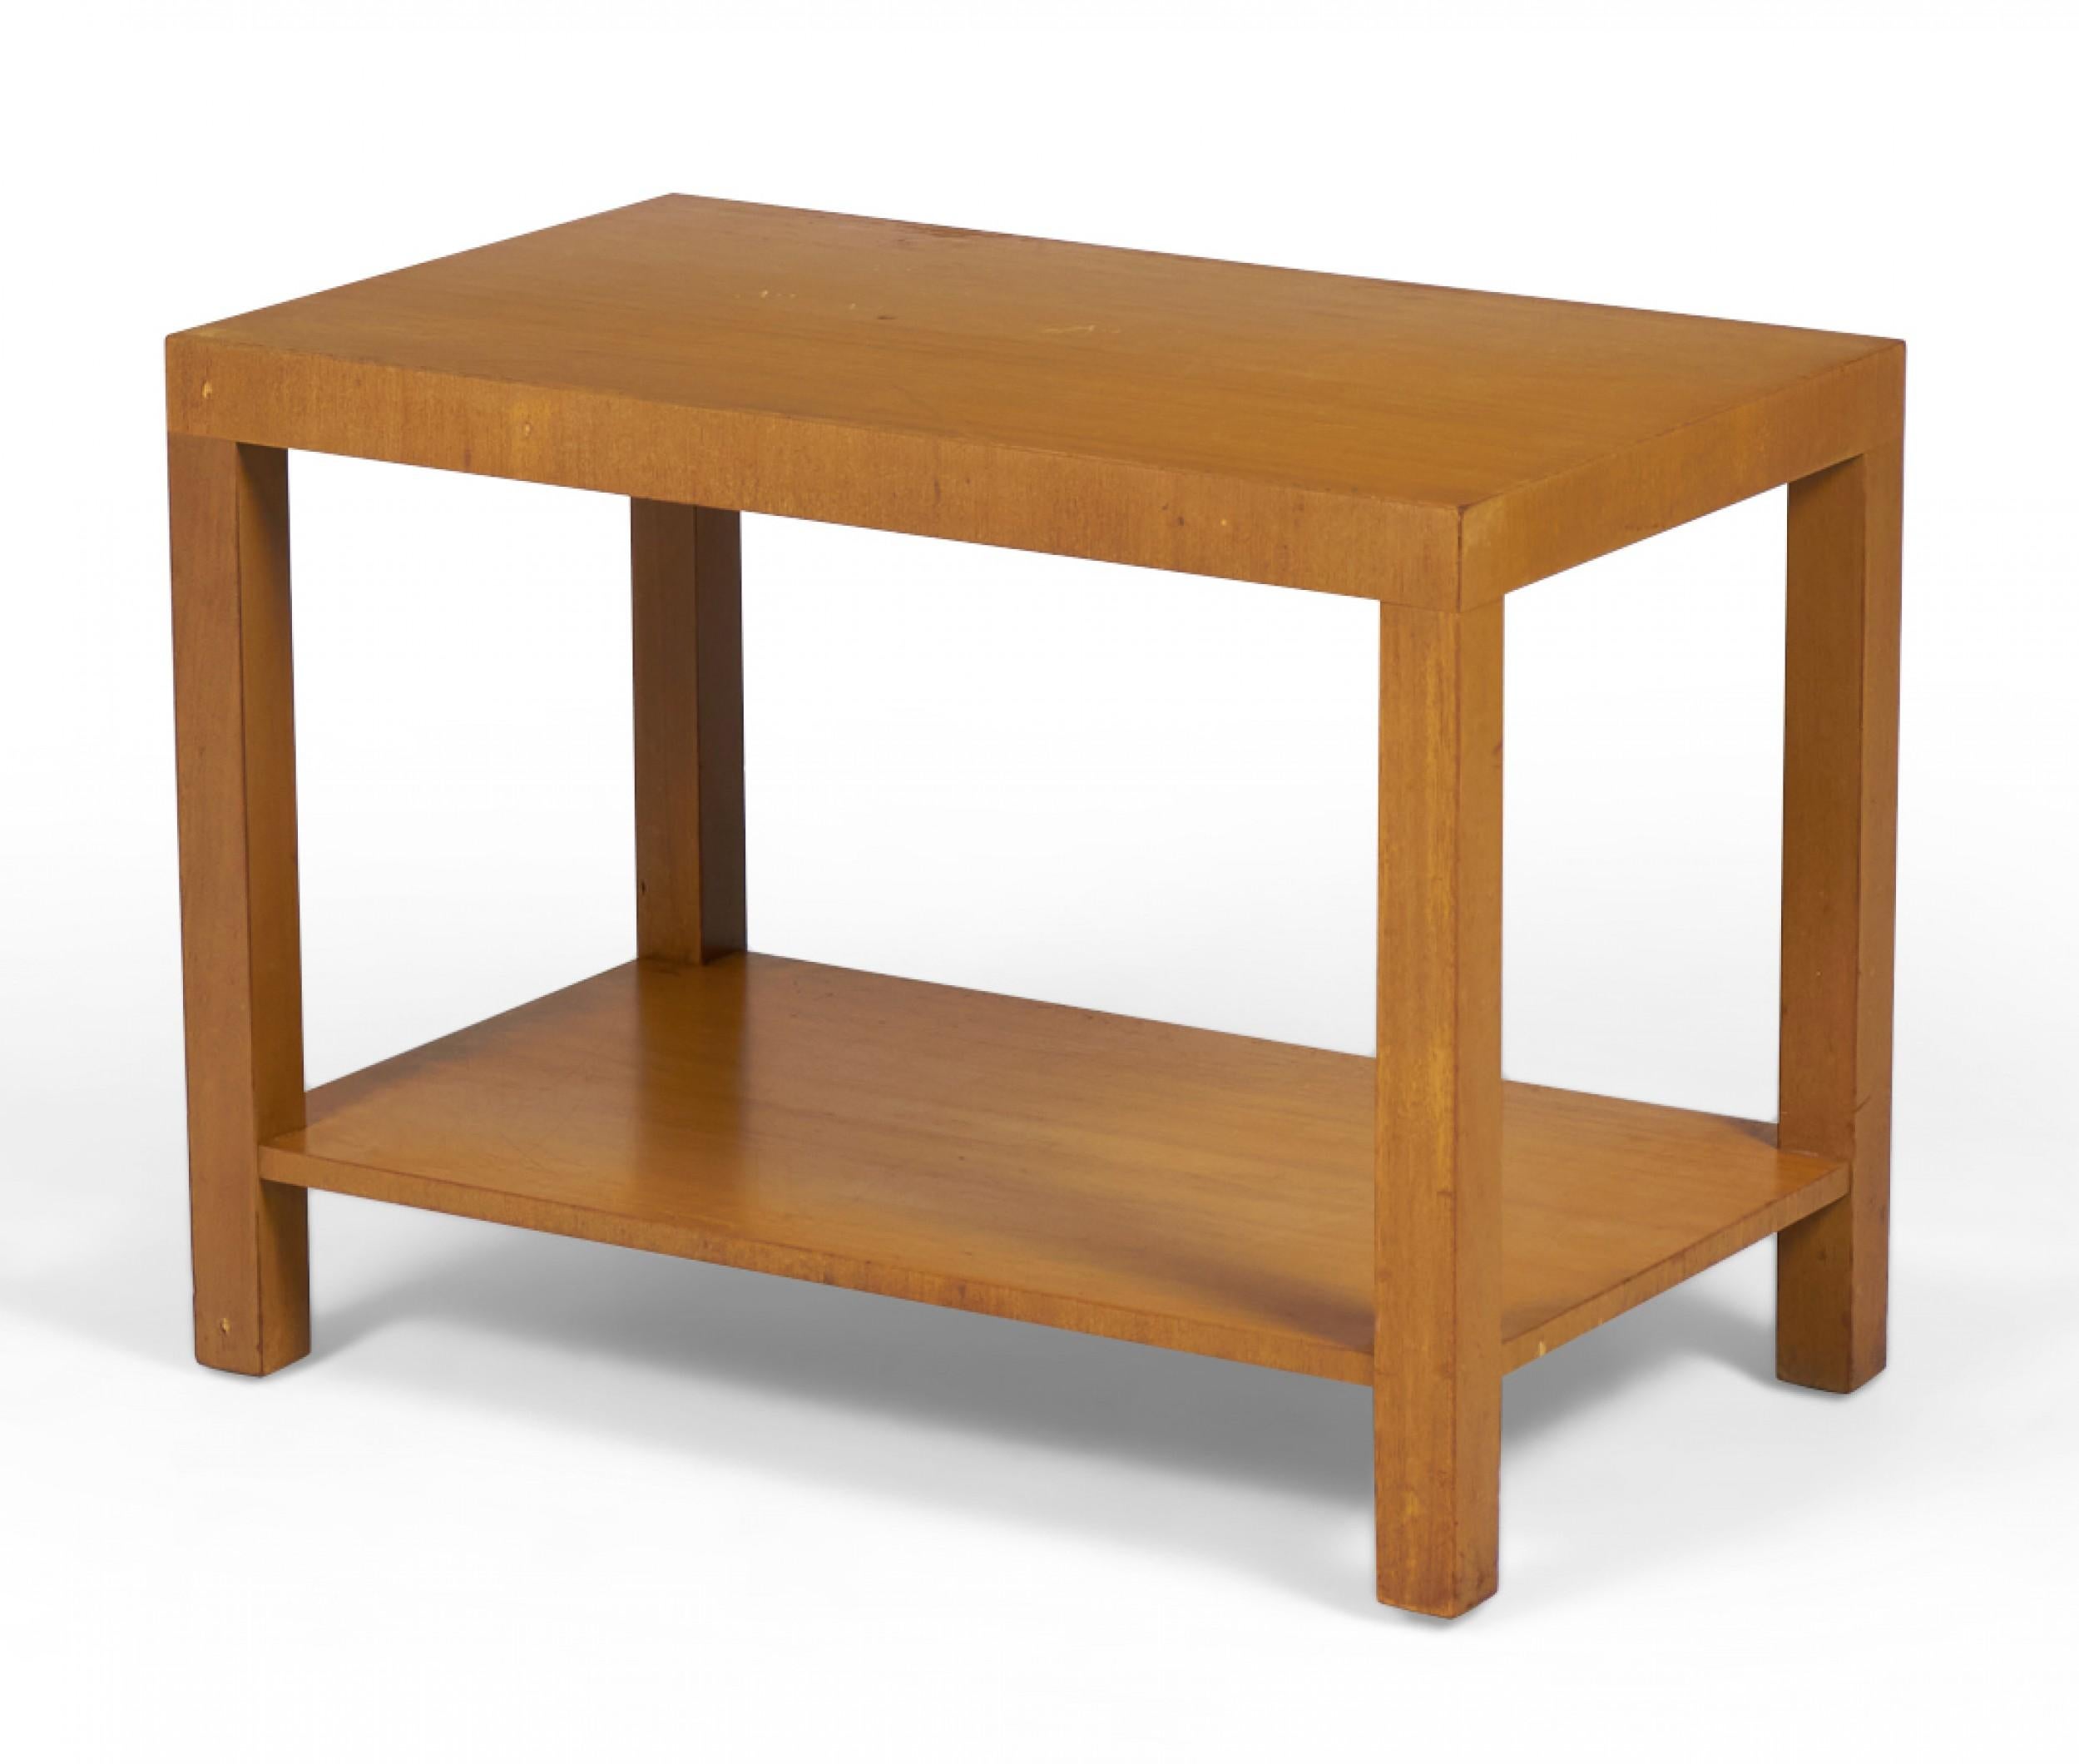 PAIR of American Mid-Century walnut Parsons-style end tables with rectangular forms and a lower stretcher shelf suspended between four square legs. (WIDDICOMB MODERN)(PRICED AS PAIR)
